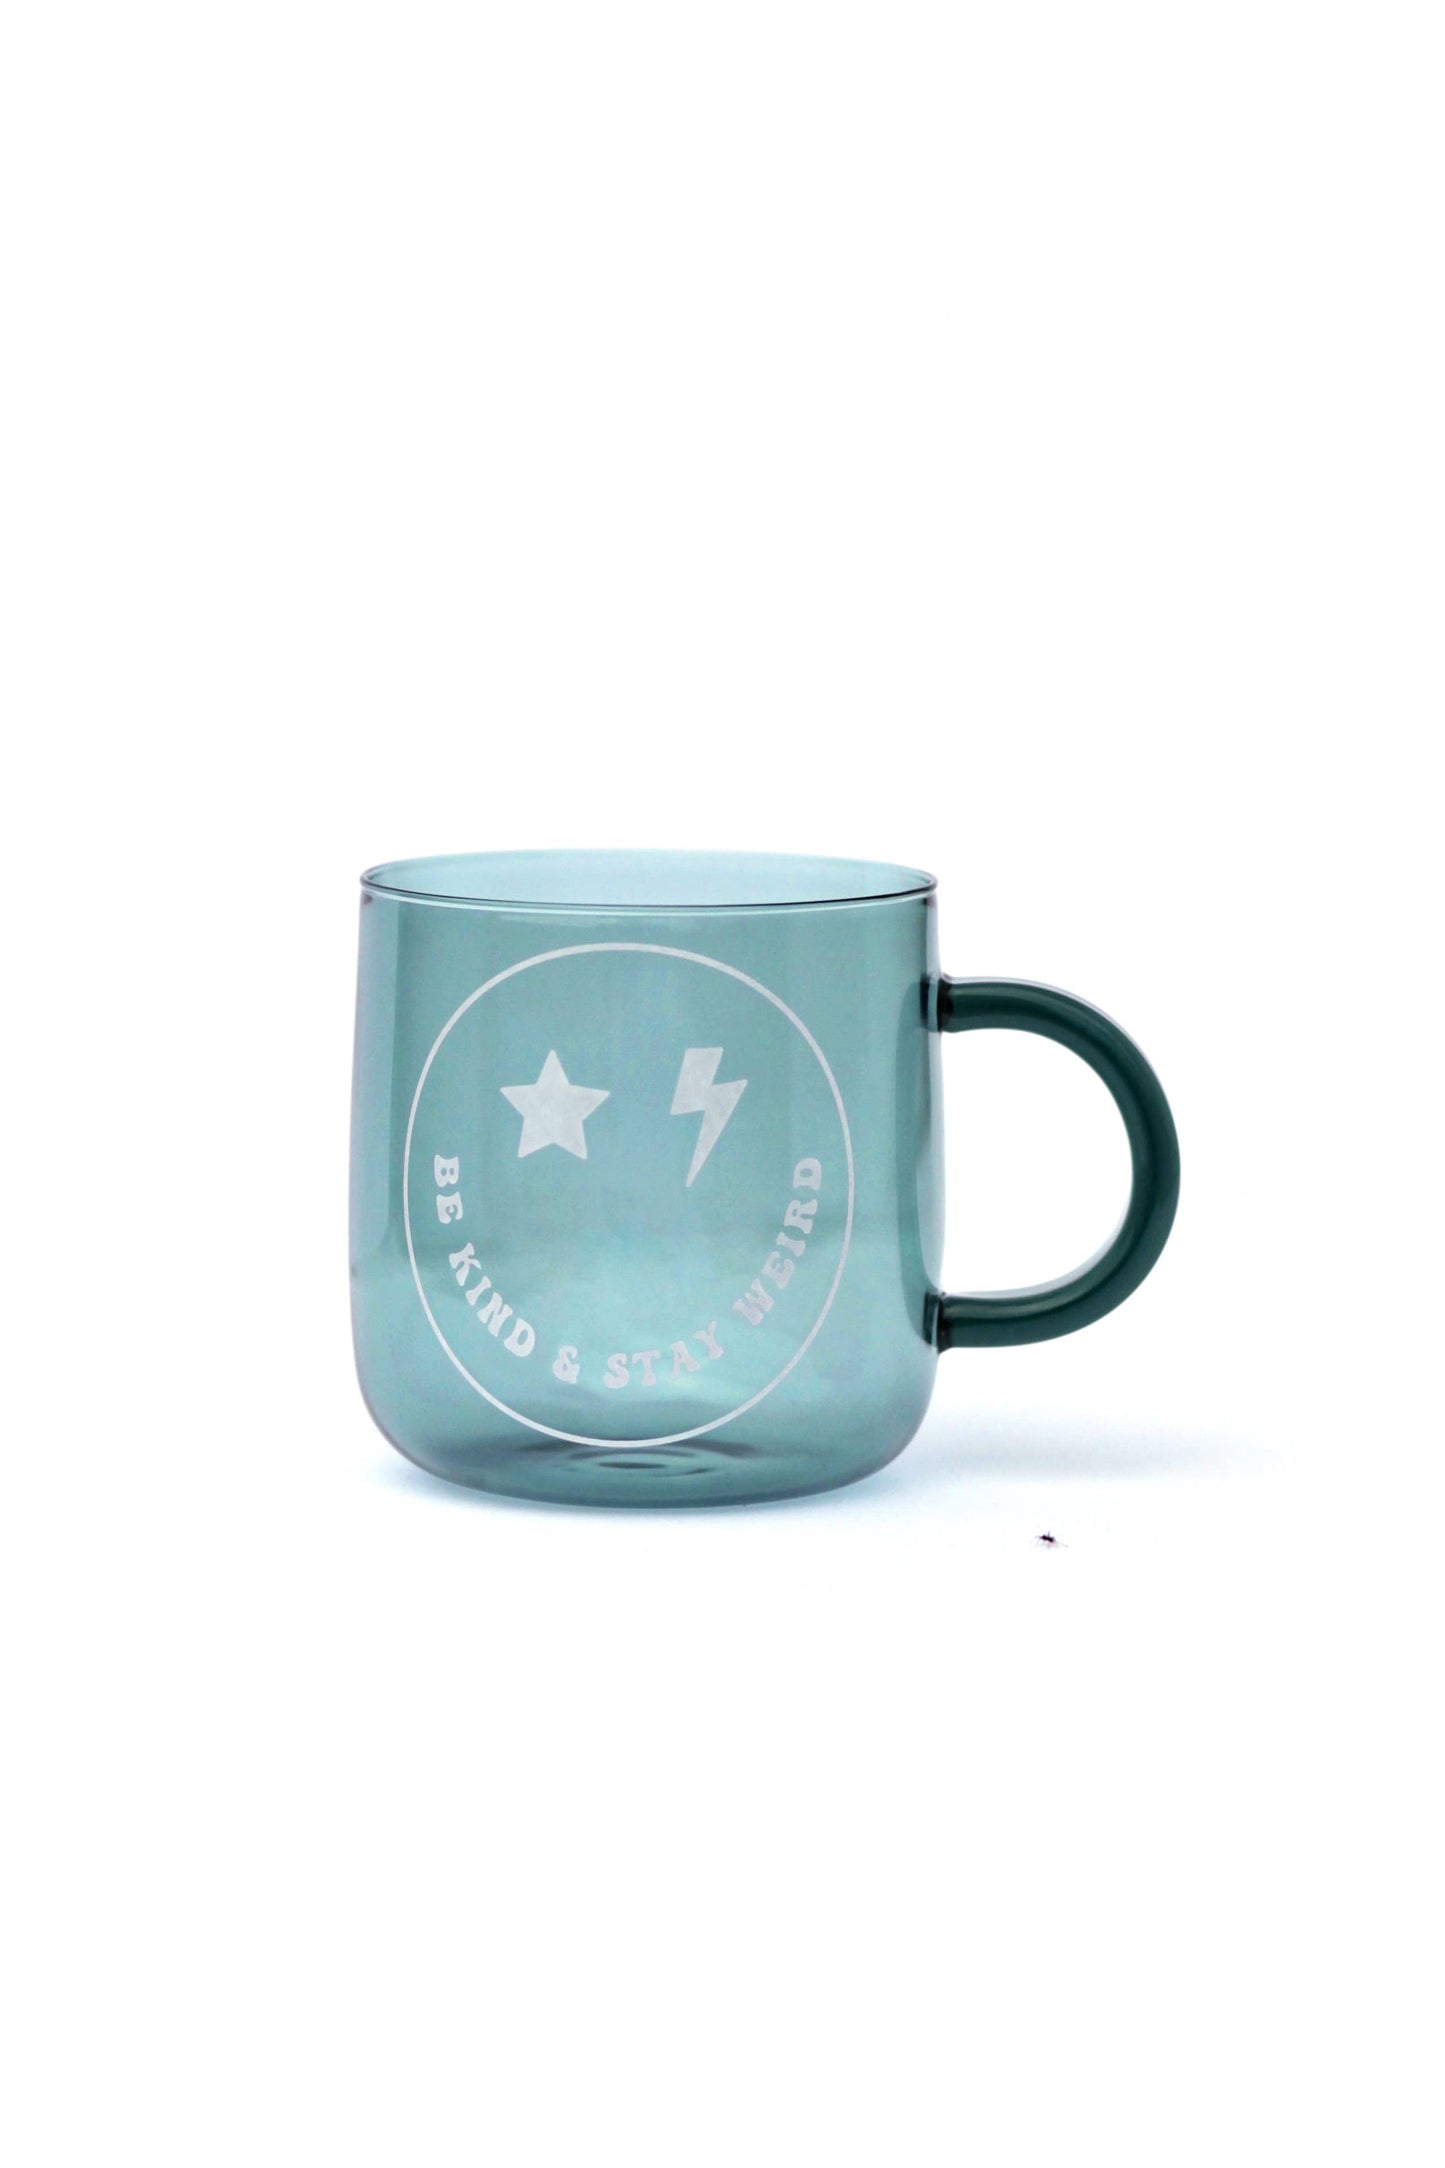 Be Kind and Stay Weird Smiley face mug, Teal tea cup